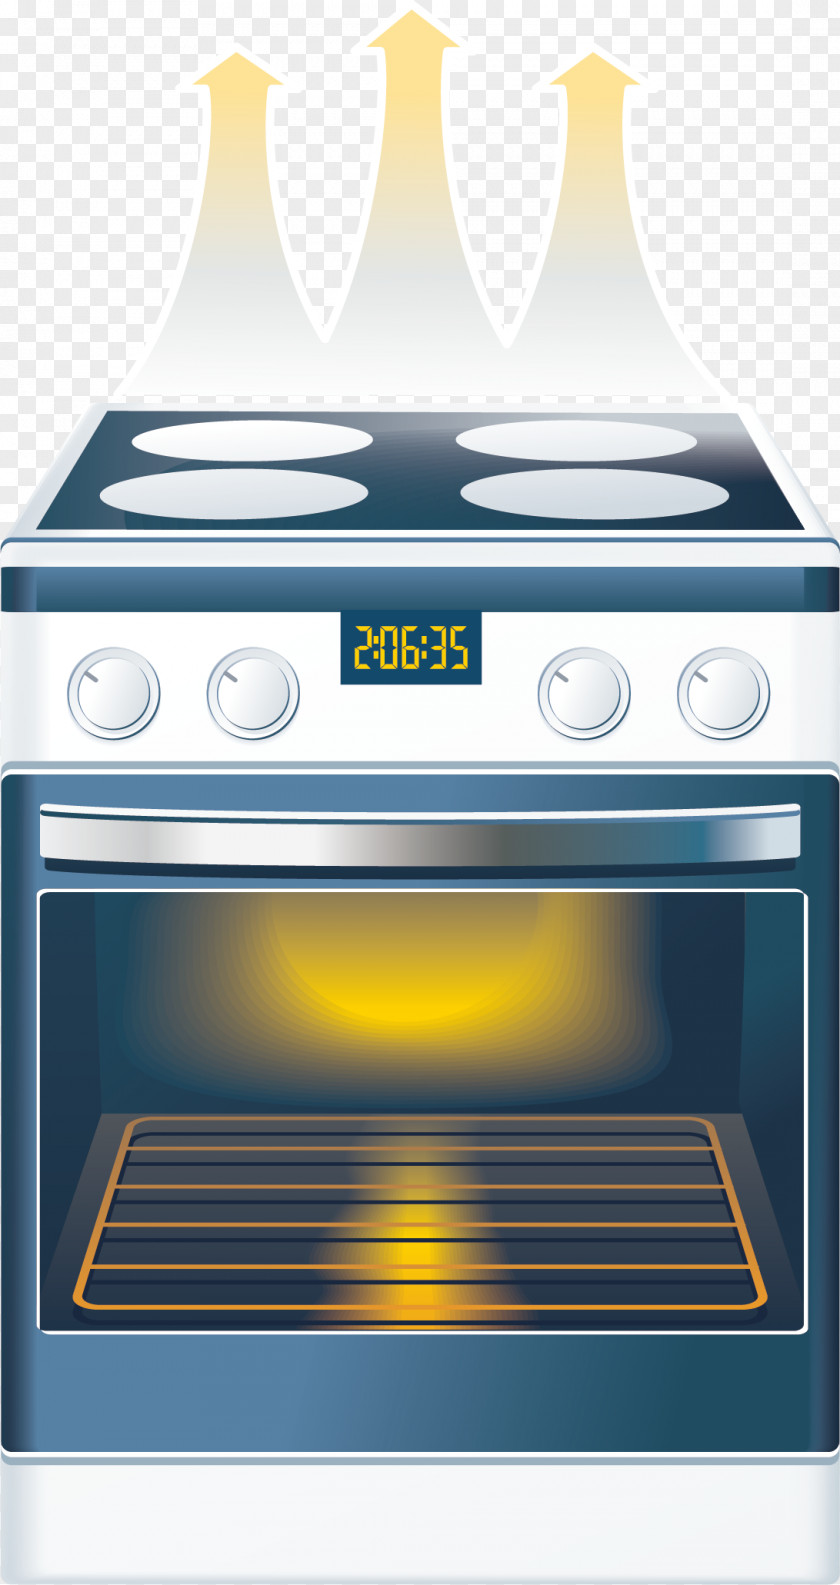 Electric Oven Vector Element Gas Stove Kitchen Electricity PNG